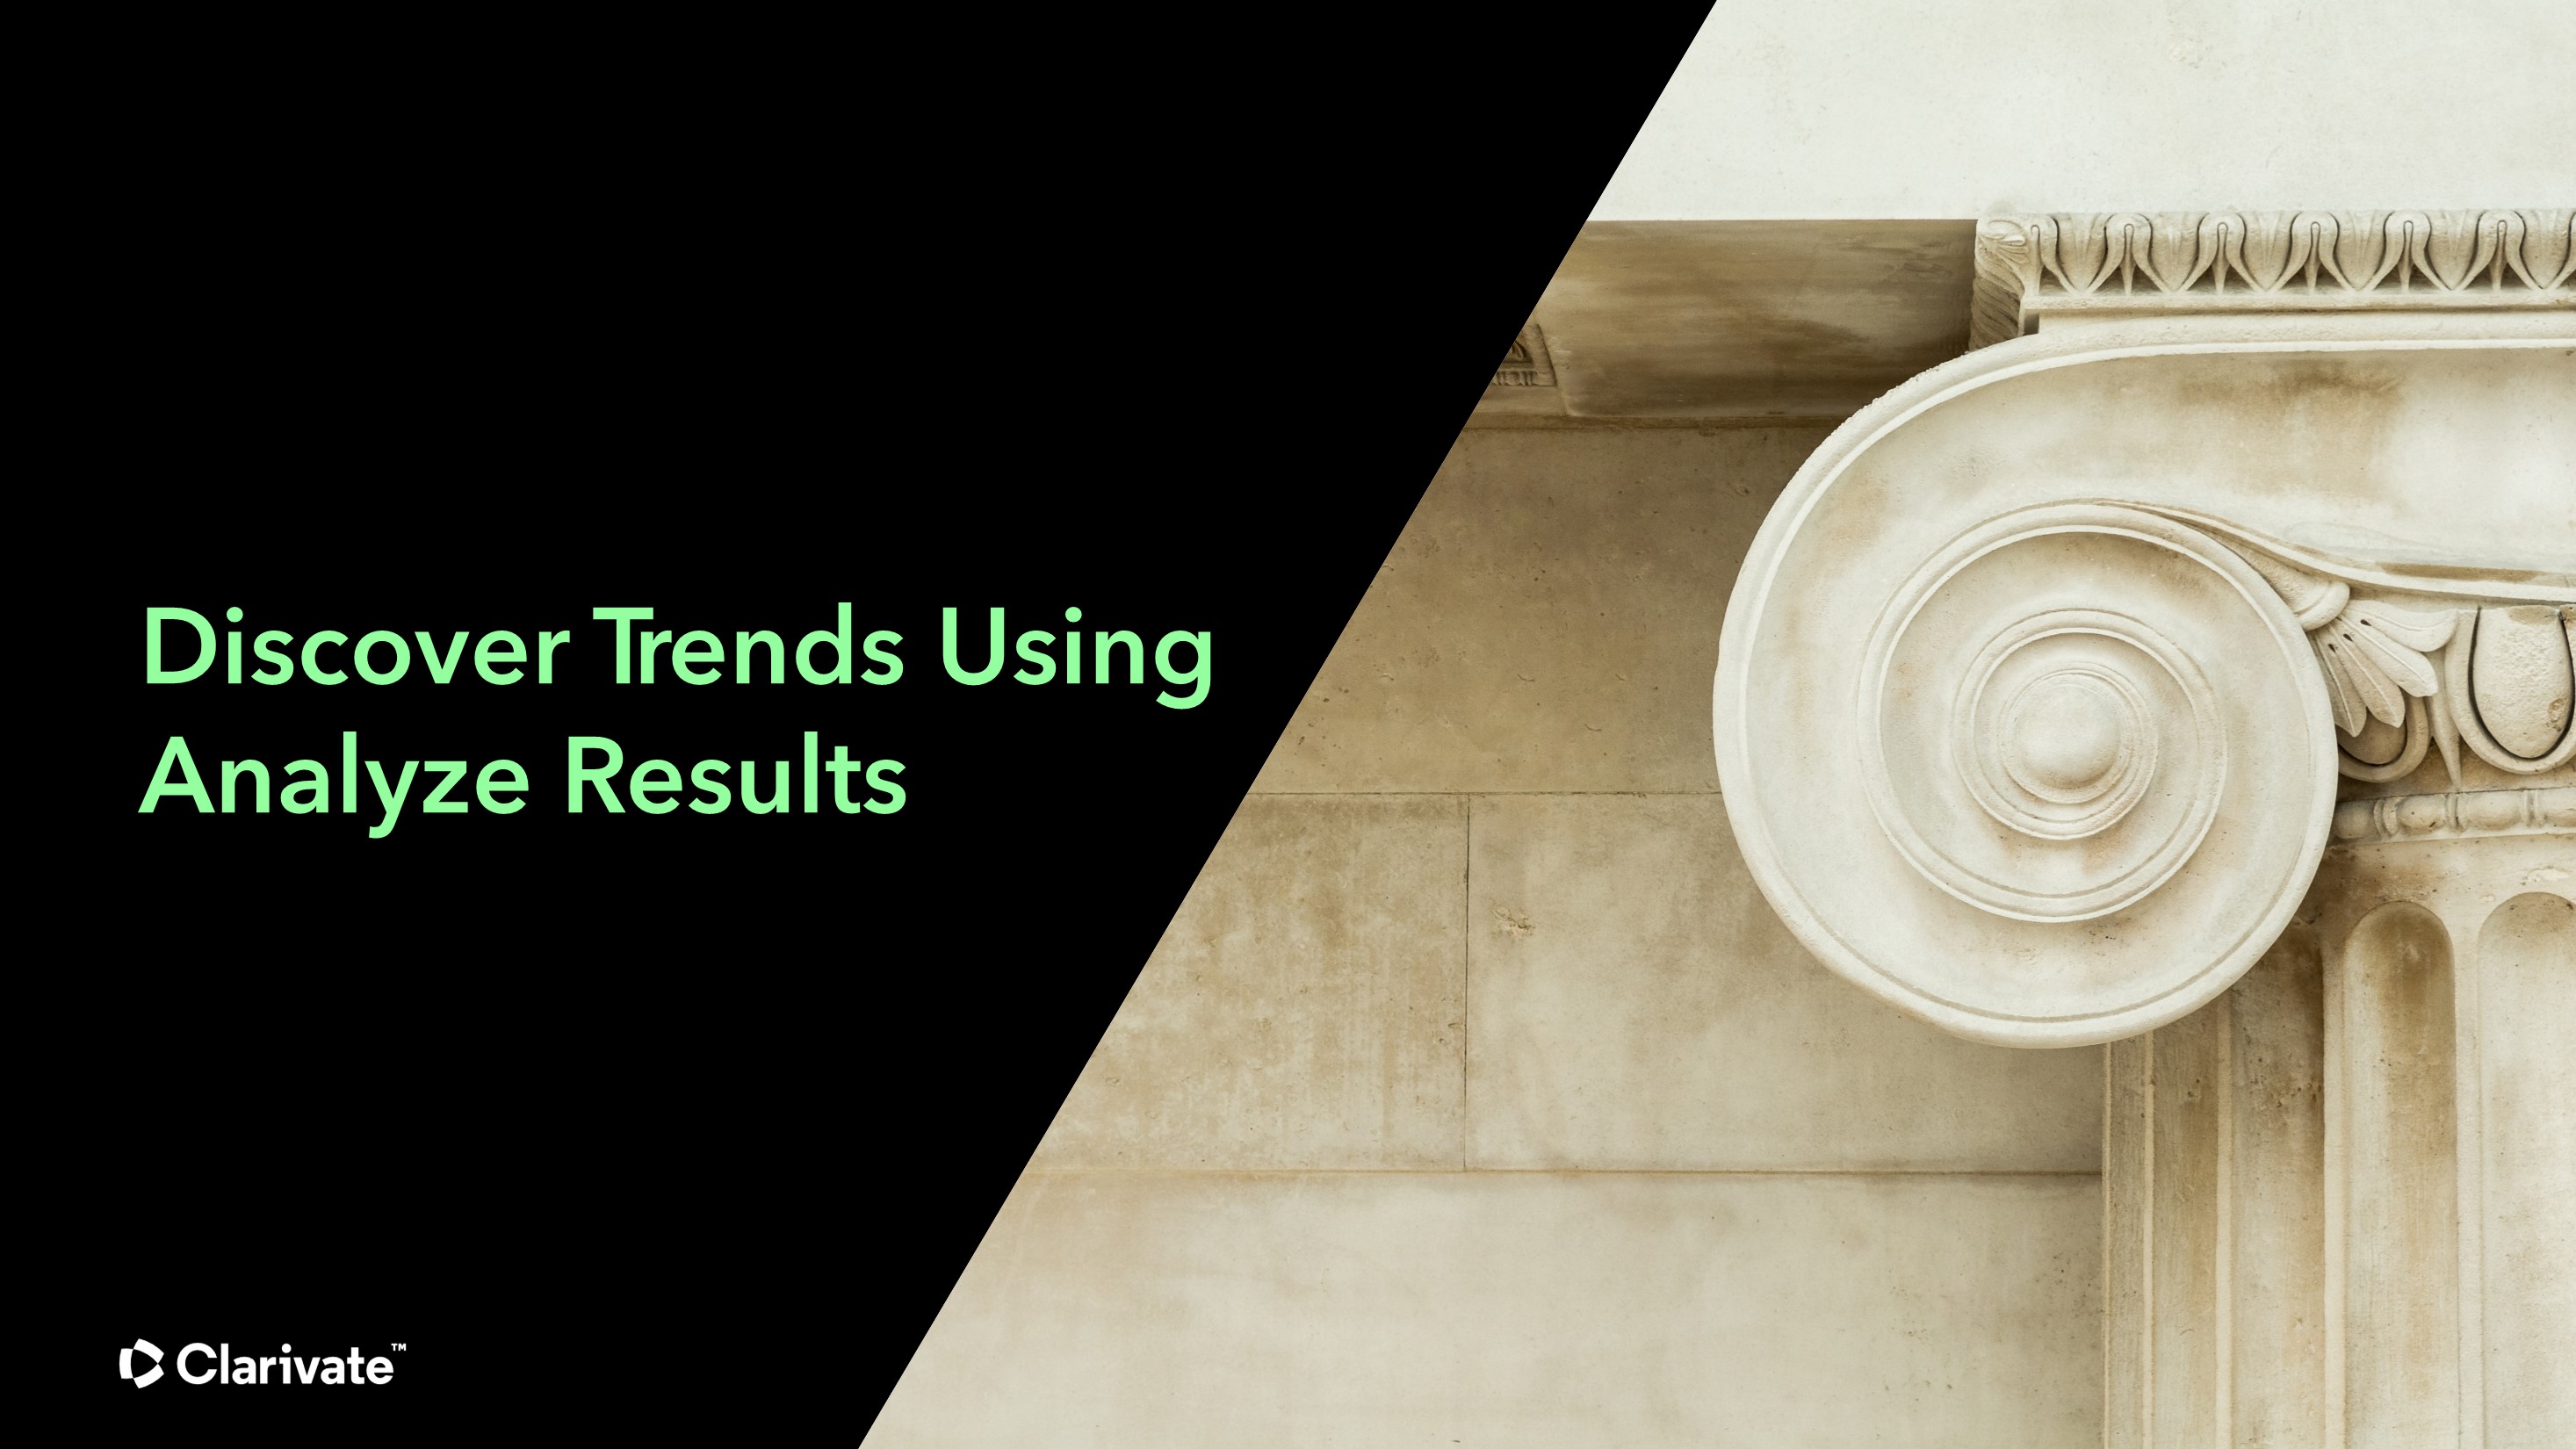 Discover trends using Analyze Results video